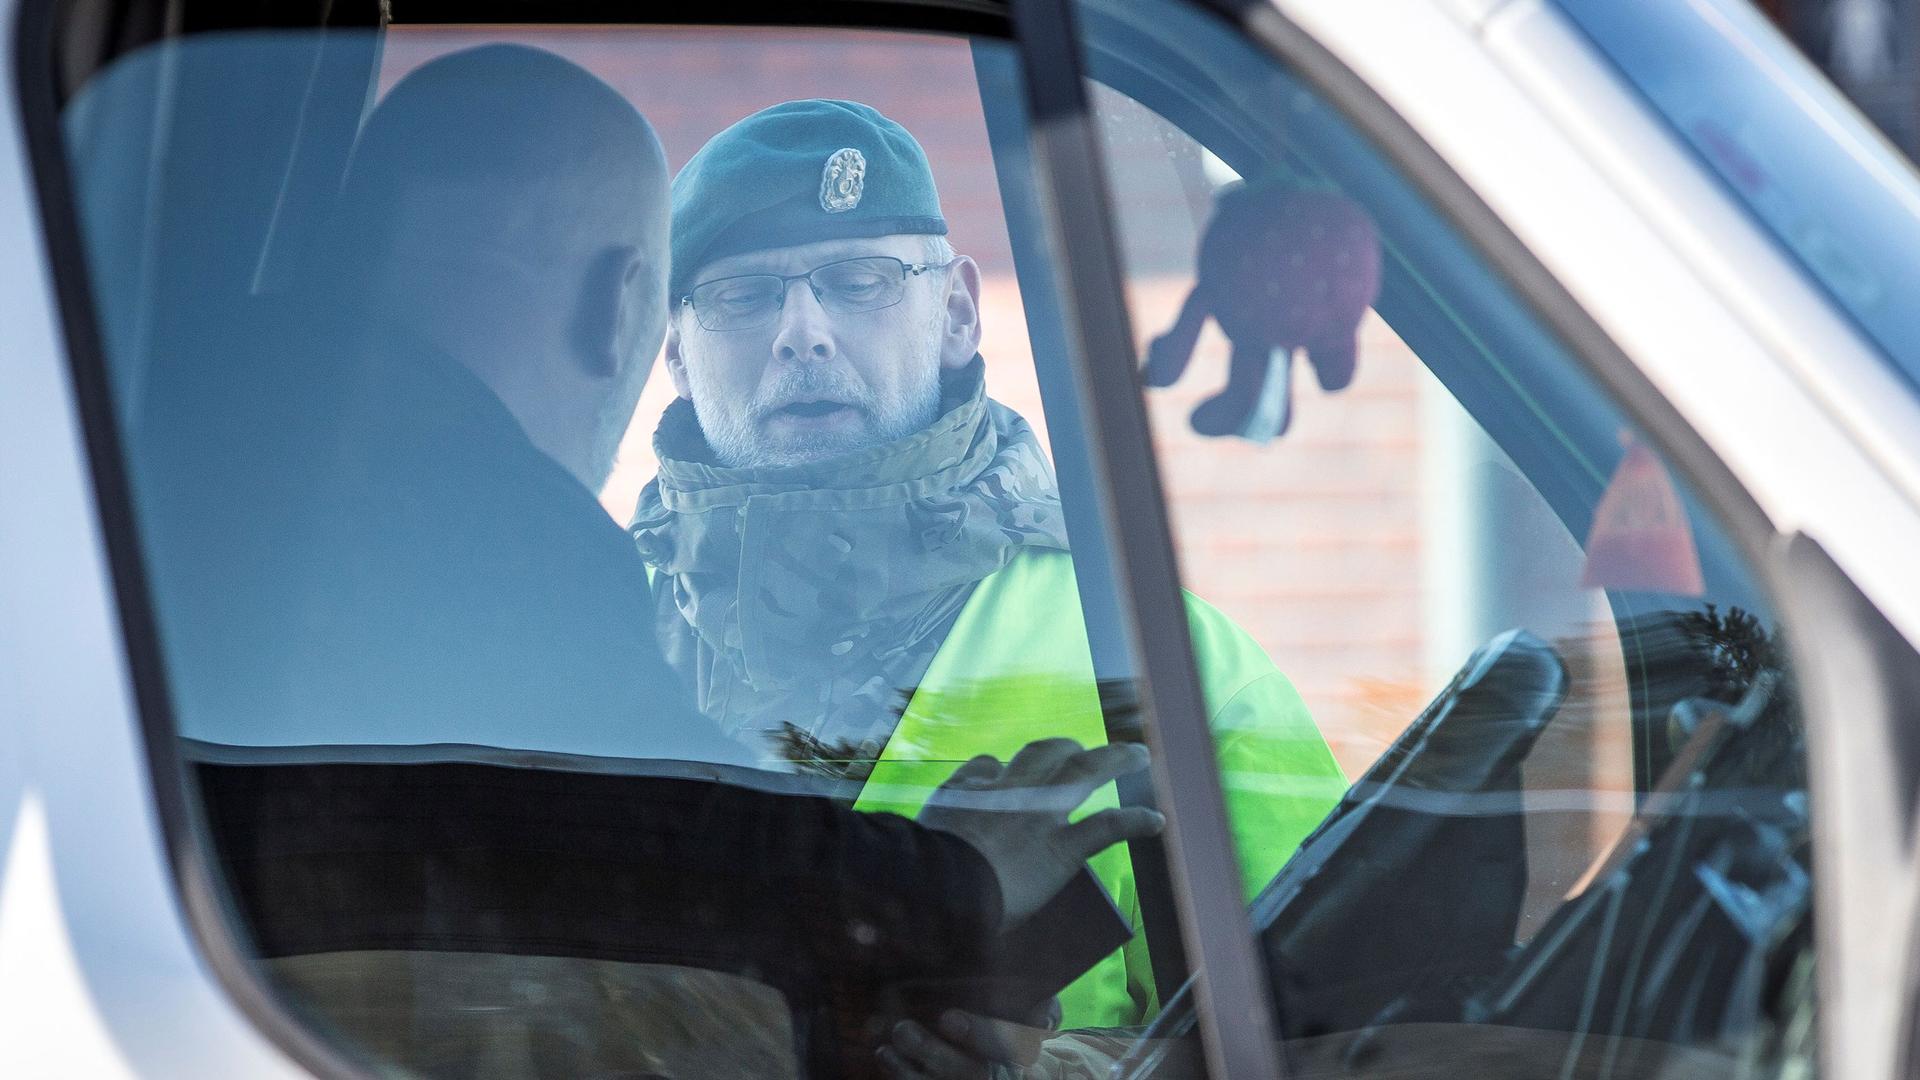 A police officer is shown through the windows of a truck with the driver looking at the officer.